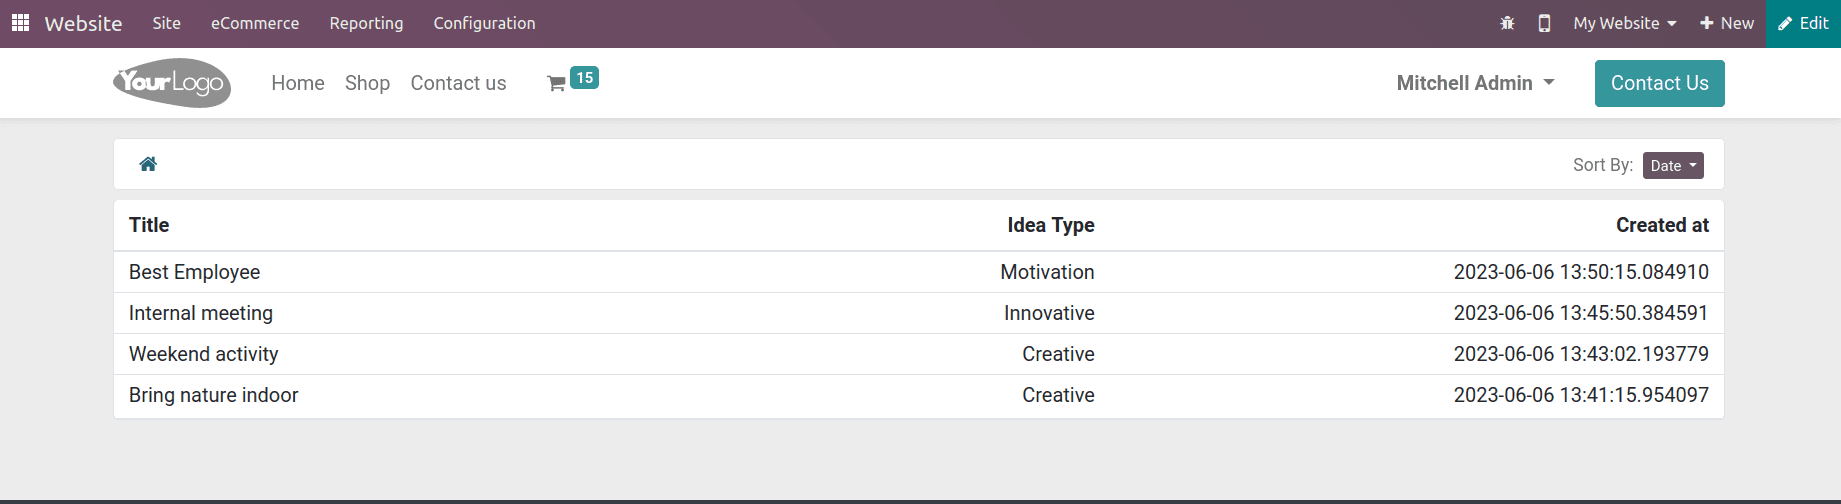 how-to-add-a-sort-option-in-odoo-16-website-portal-2-cybrosys